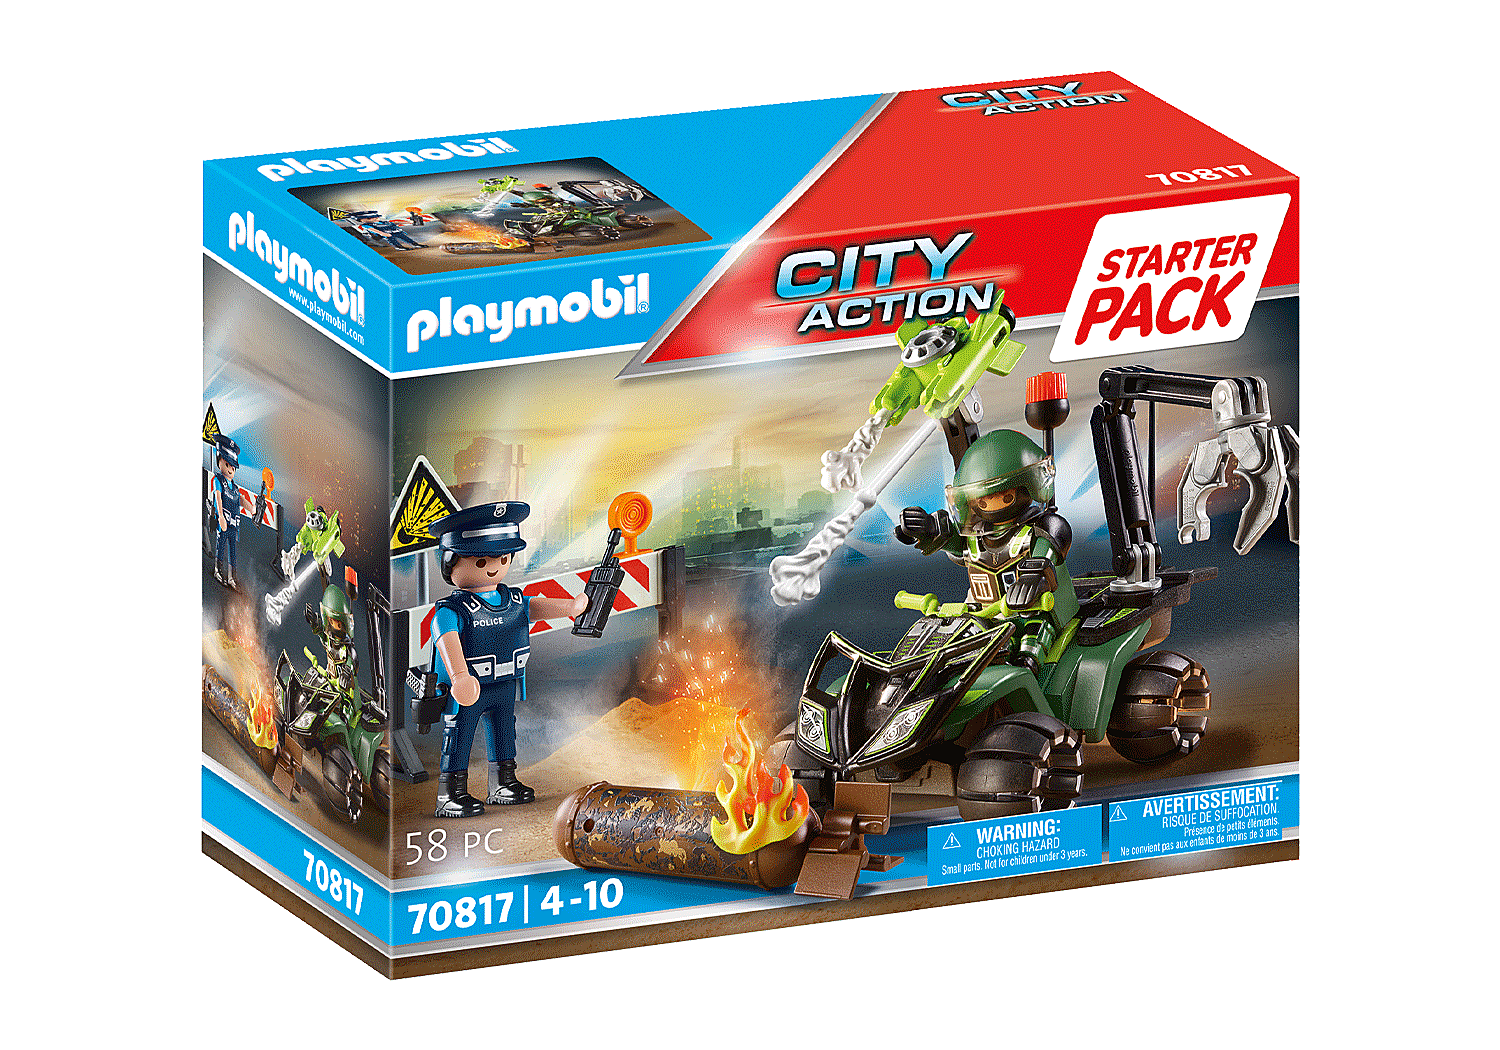 Playmobil Police - Action Figures & Accessories